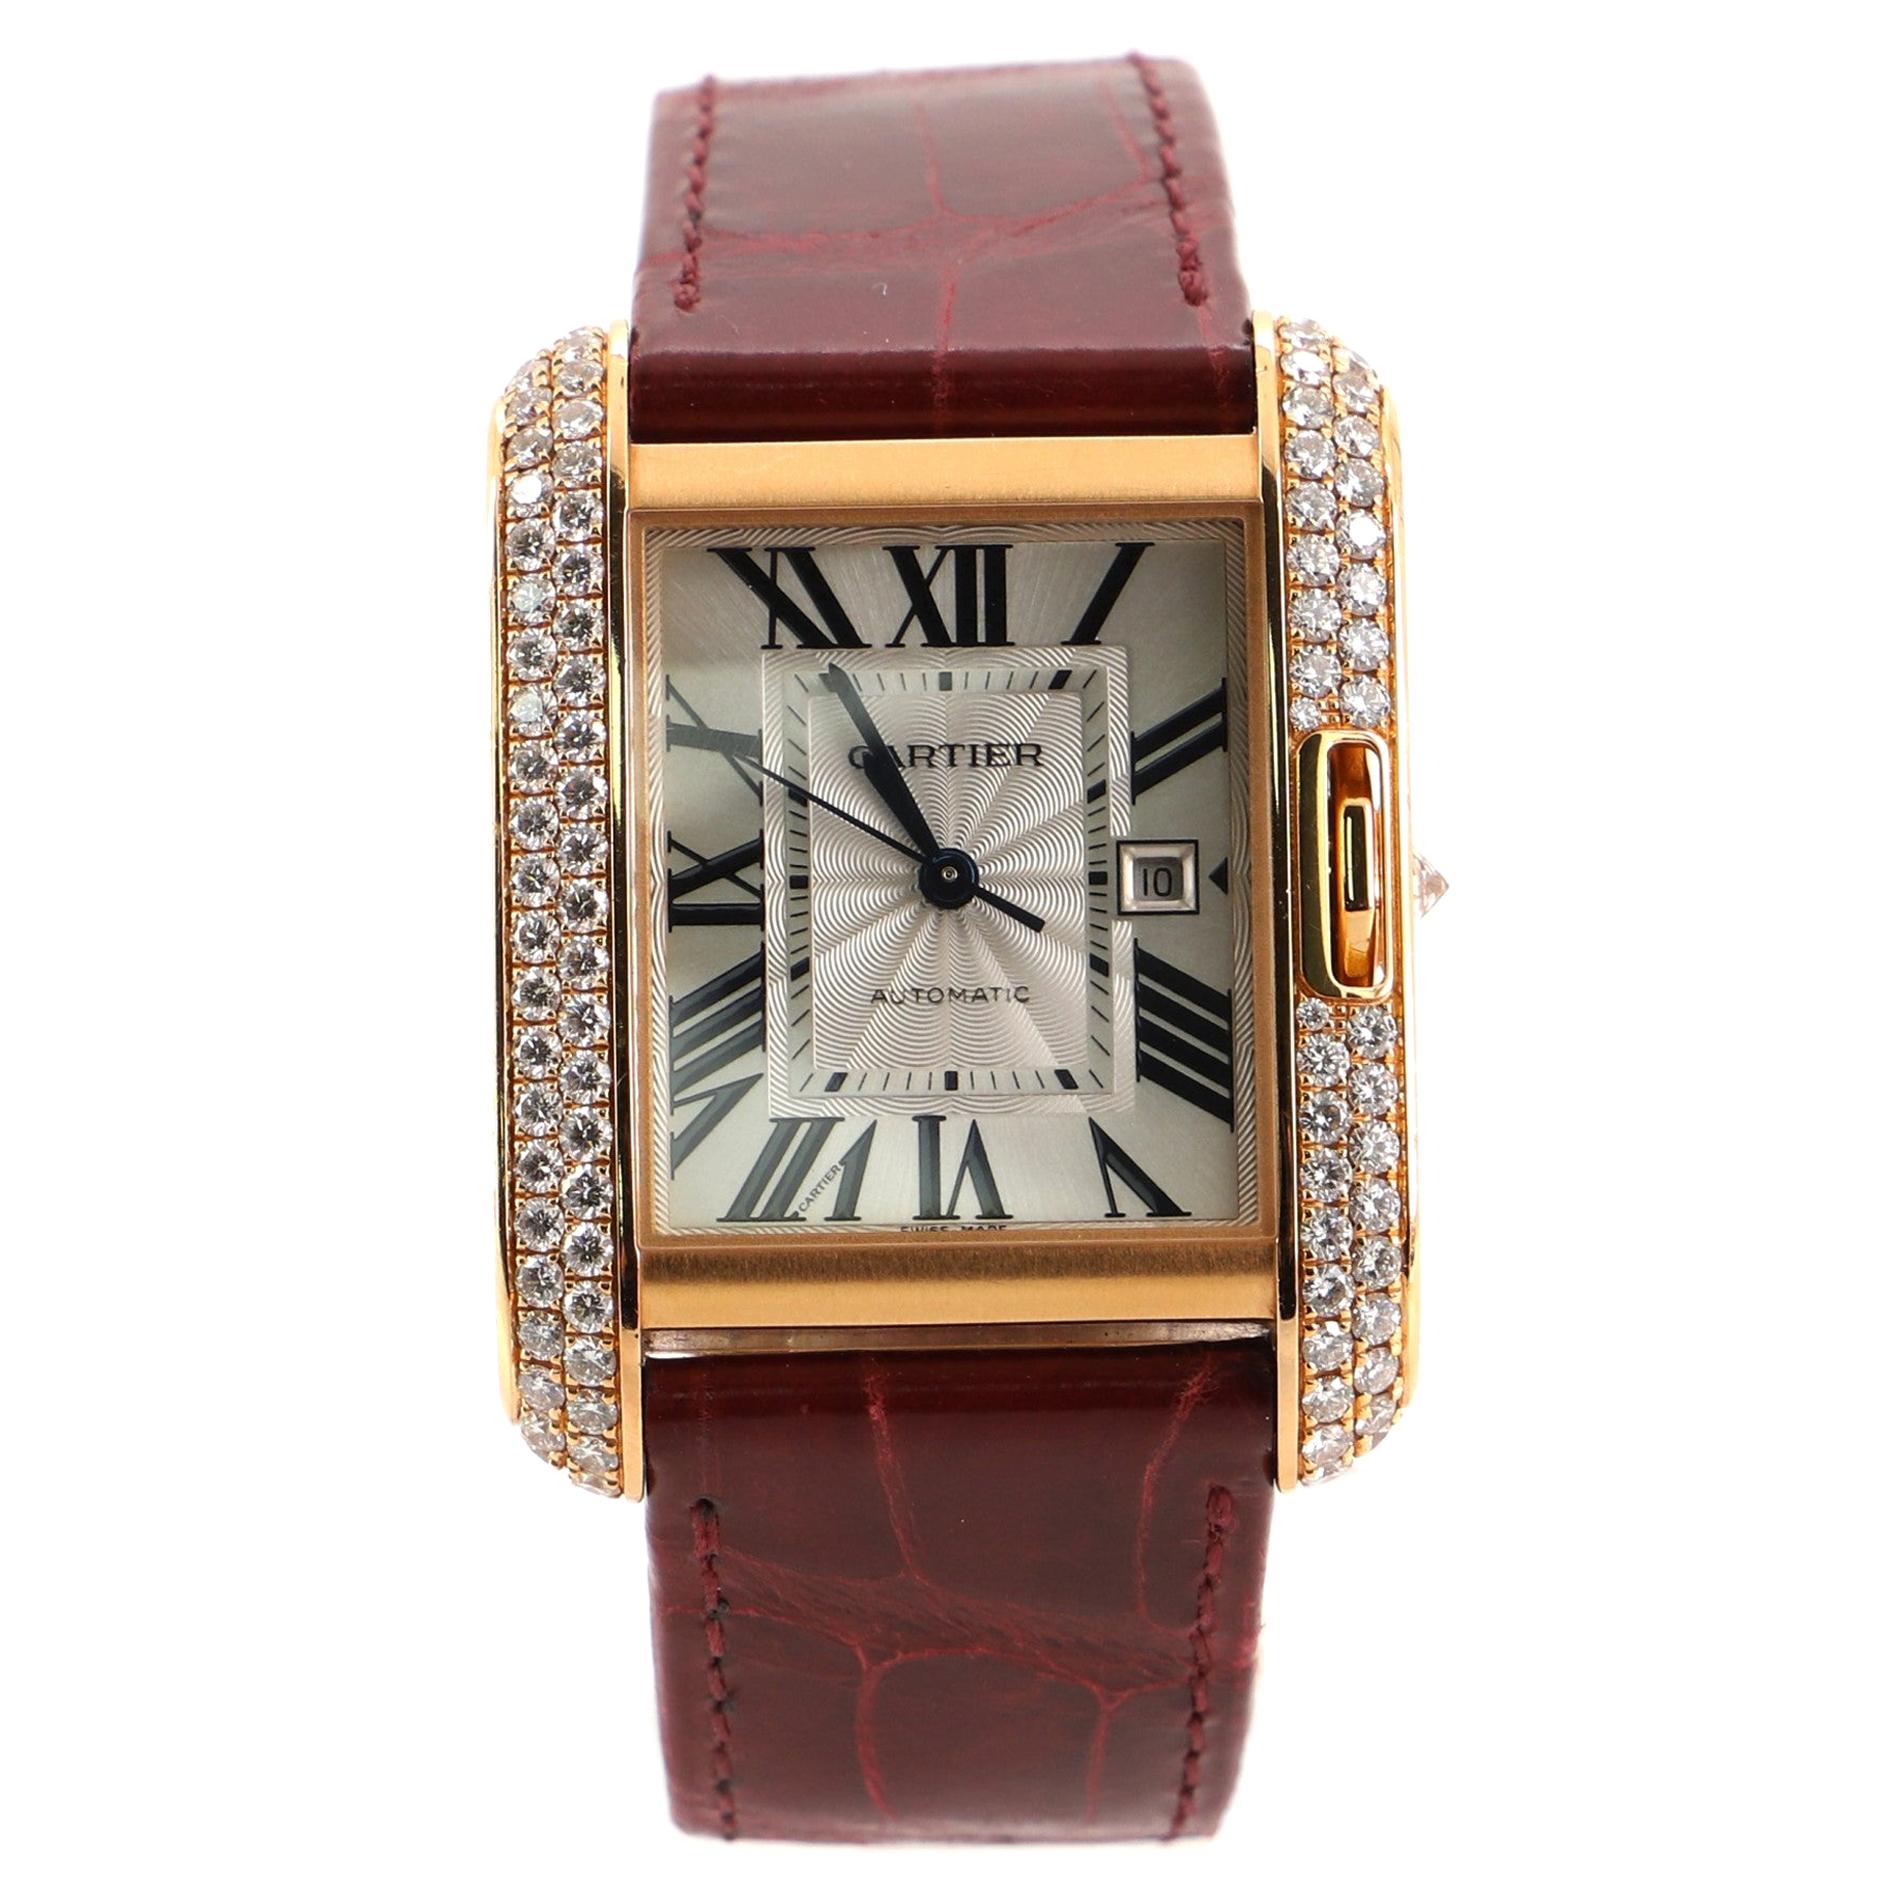 Cartier Tank Anglaise Automatic Watch Rose Gold and Alligator with Diamonds 30